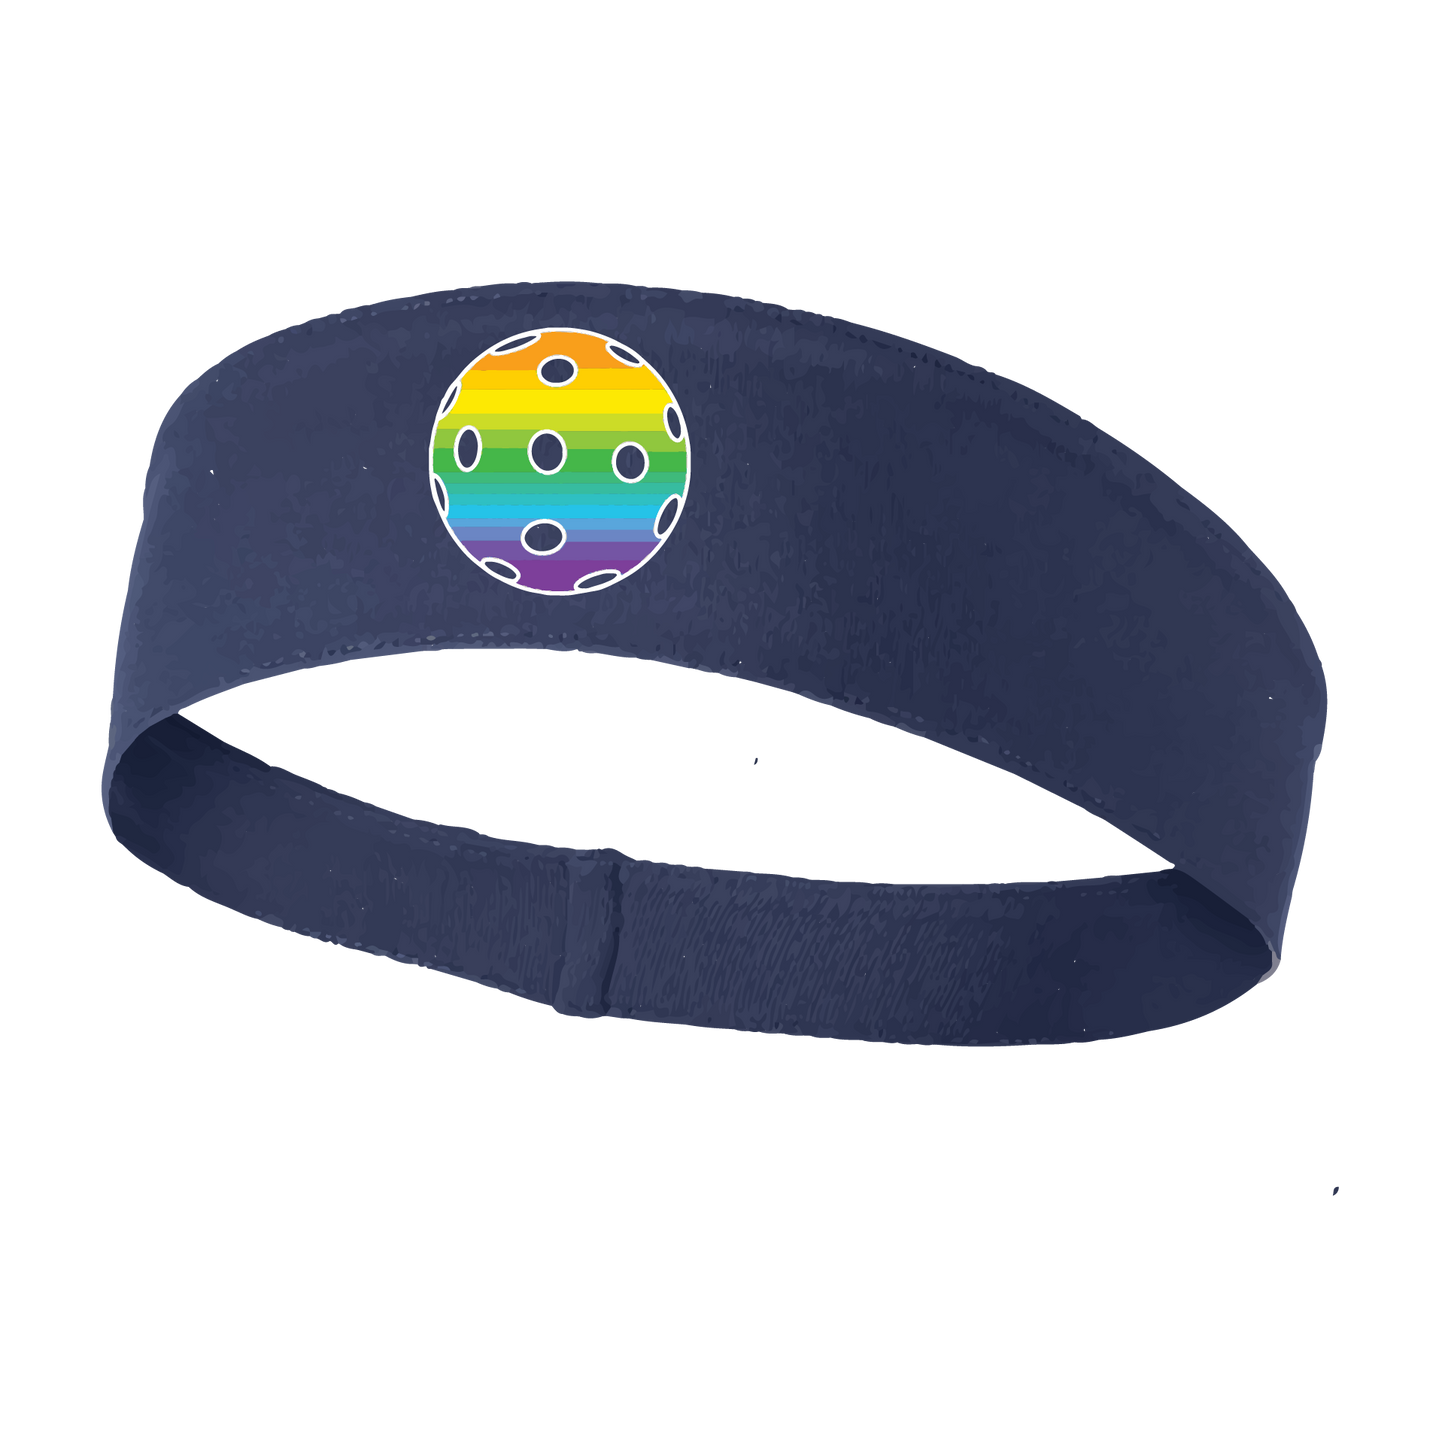 Pickleball Headband Design: Customizable Pickleball color on headband  This fun, pickleball designed, moisture-wicking headband narrows in the back to fit more securely. Single-needle top-stitched edging. These headbands come in a variety of colors. Truly shows your love for the sport of pickleball!! 